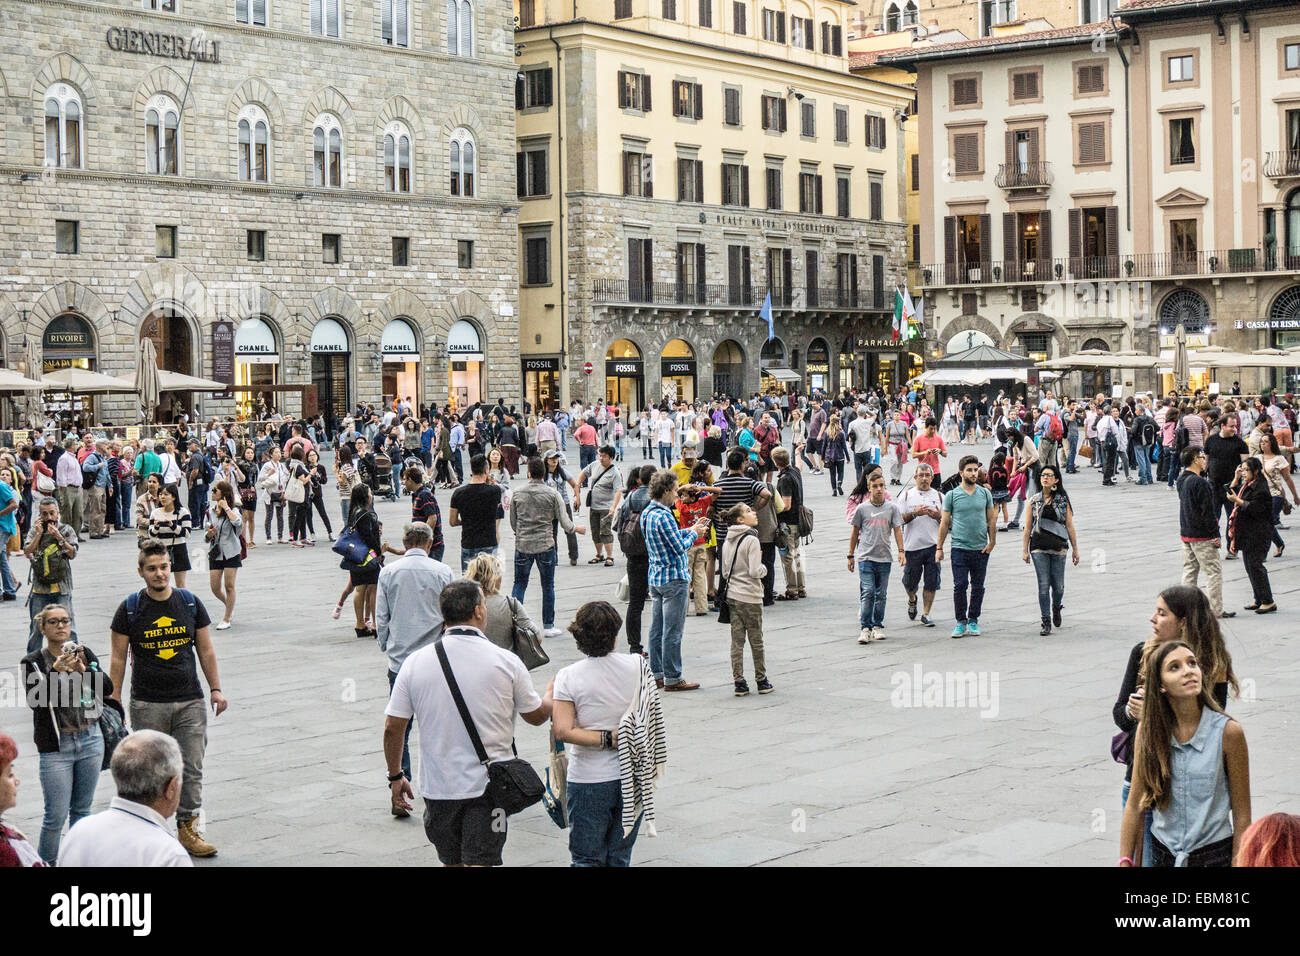 view looking northwest across historic Piazza della Signoria crowded with pedestrians Florence Italy Stock Photo